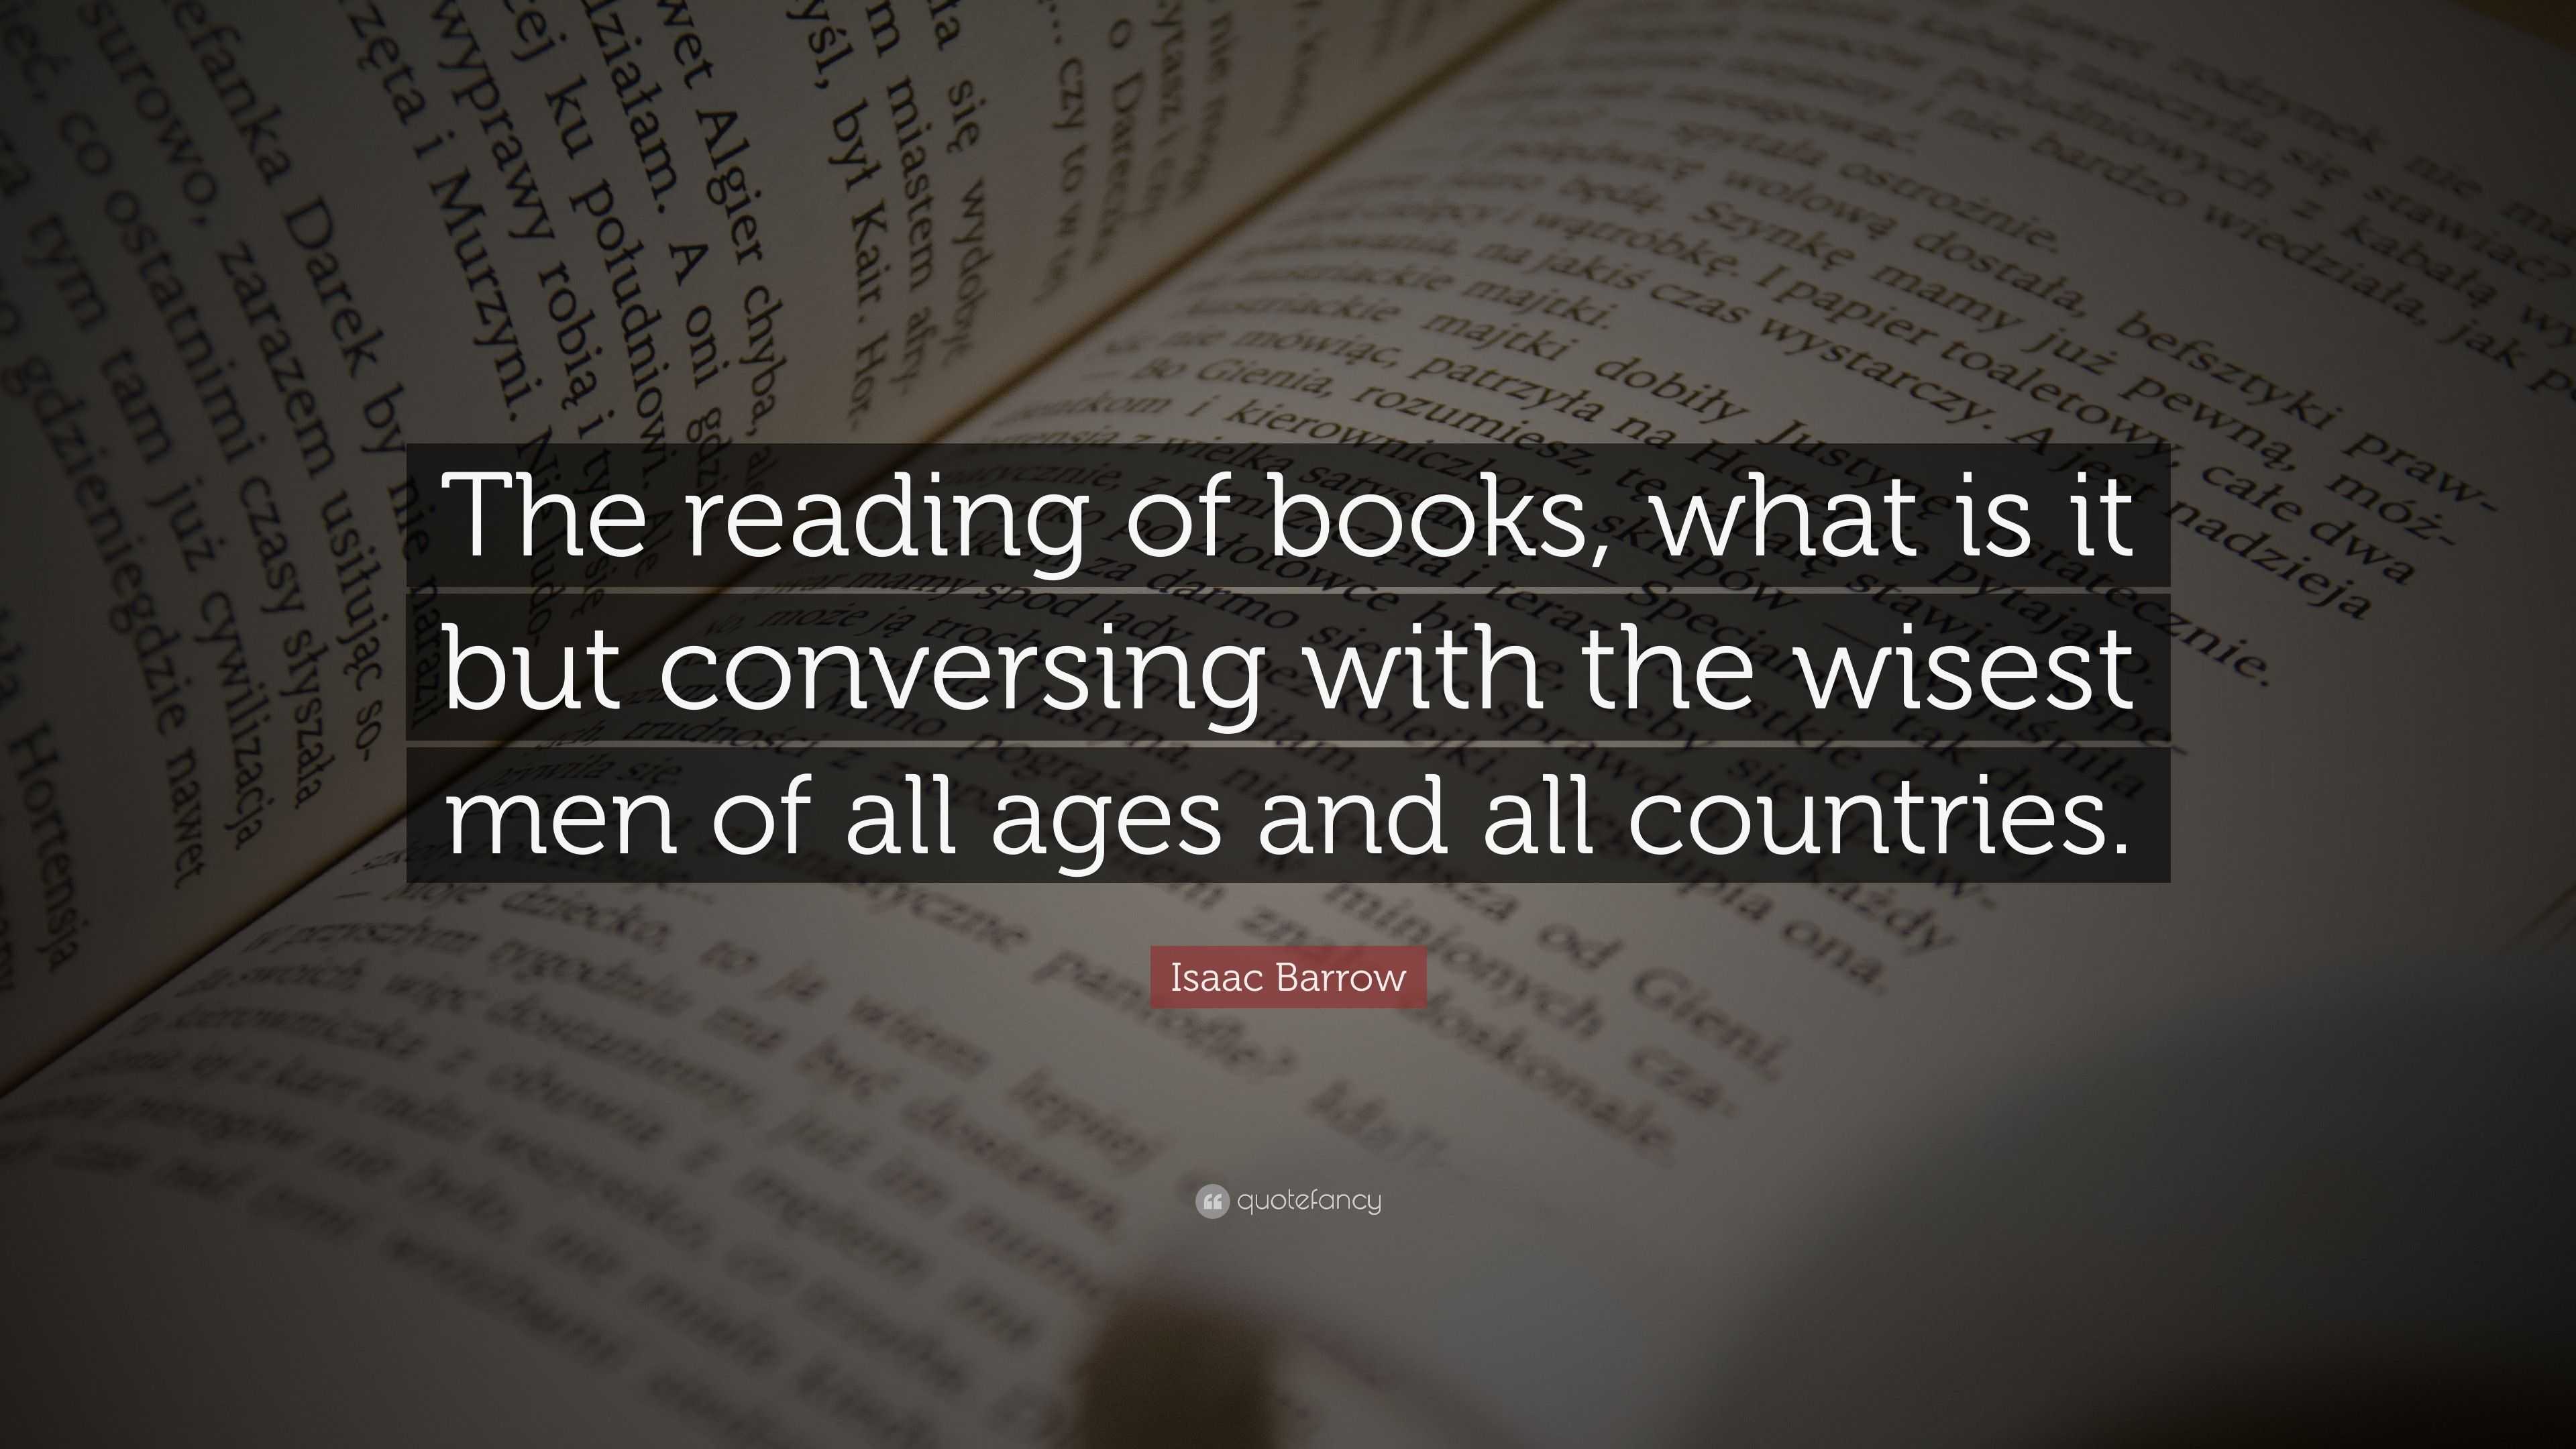 Isaac Barrow Quote: “The reading of books, what is it but conversing ...